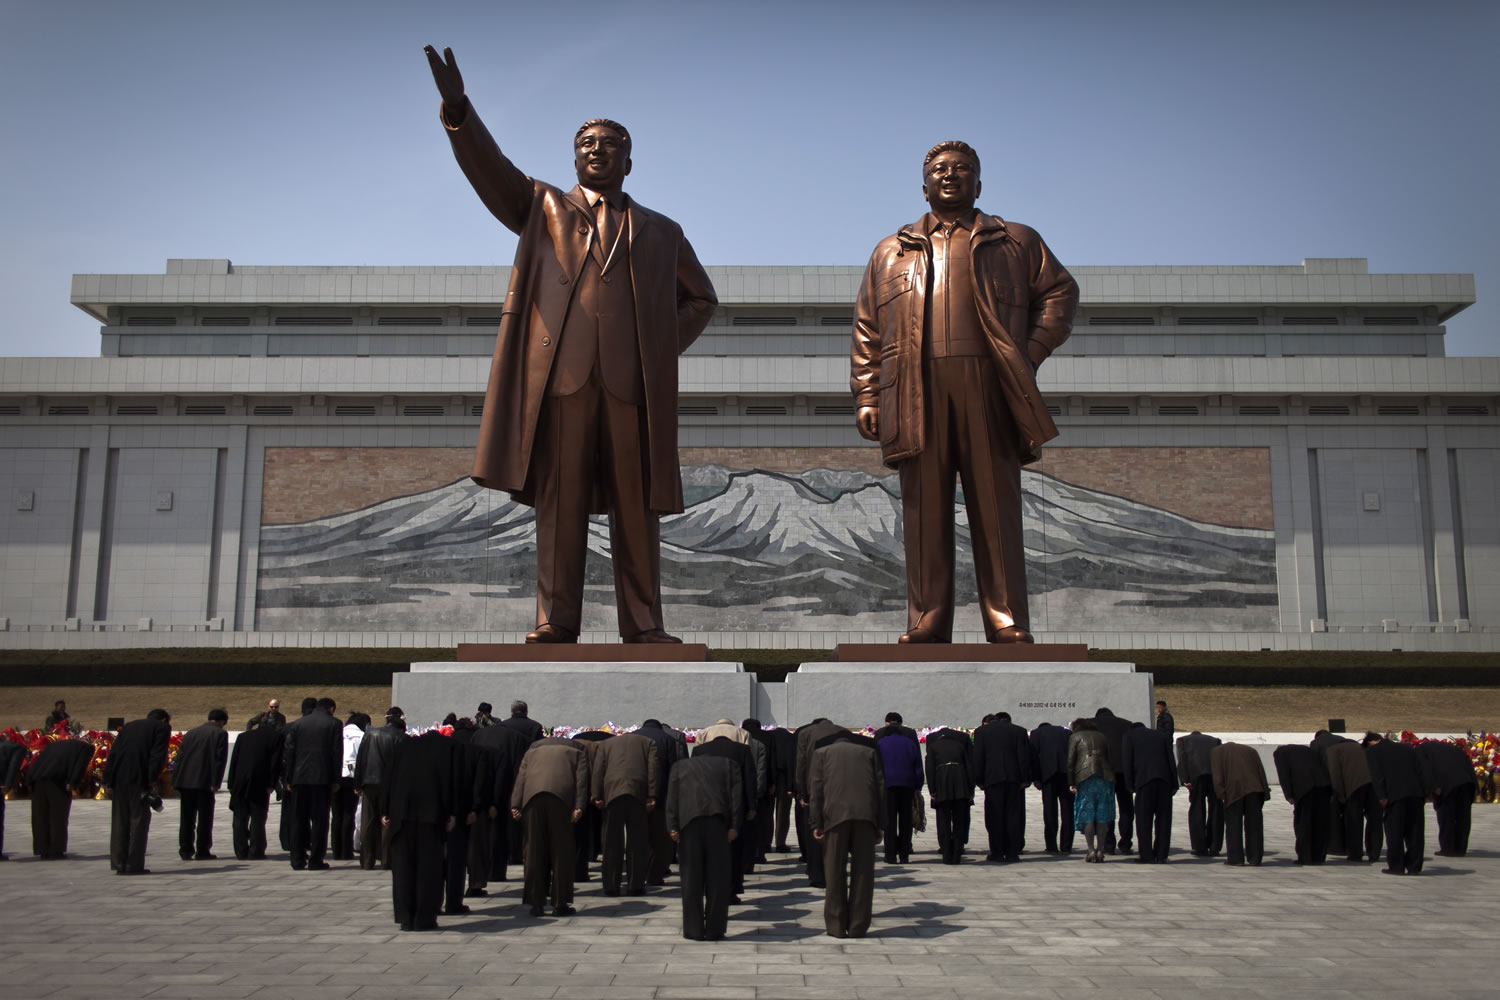 People bow to statues of North Korea's late leaders Kim Il Sung, left, and Kim Jong Il on Saturday in Pyongyang, North Korea.